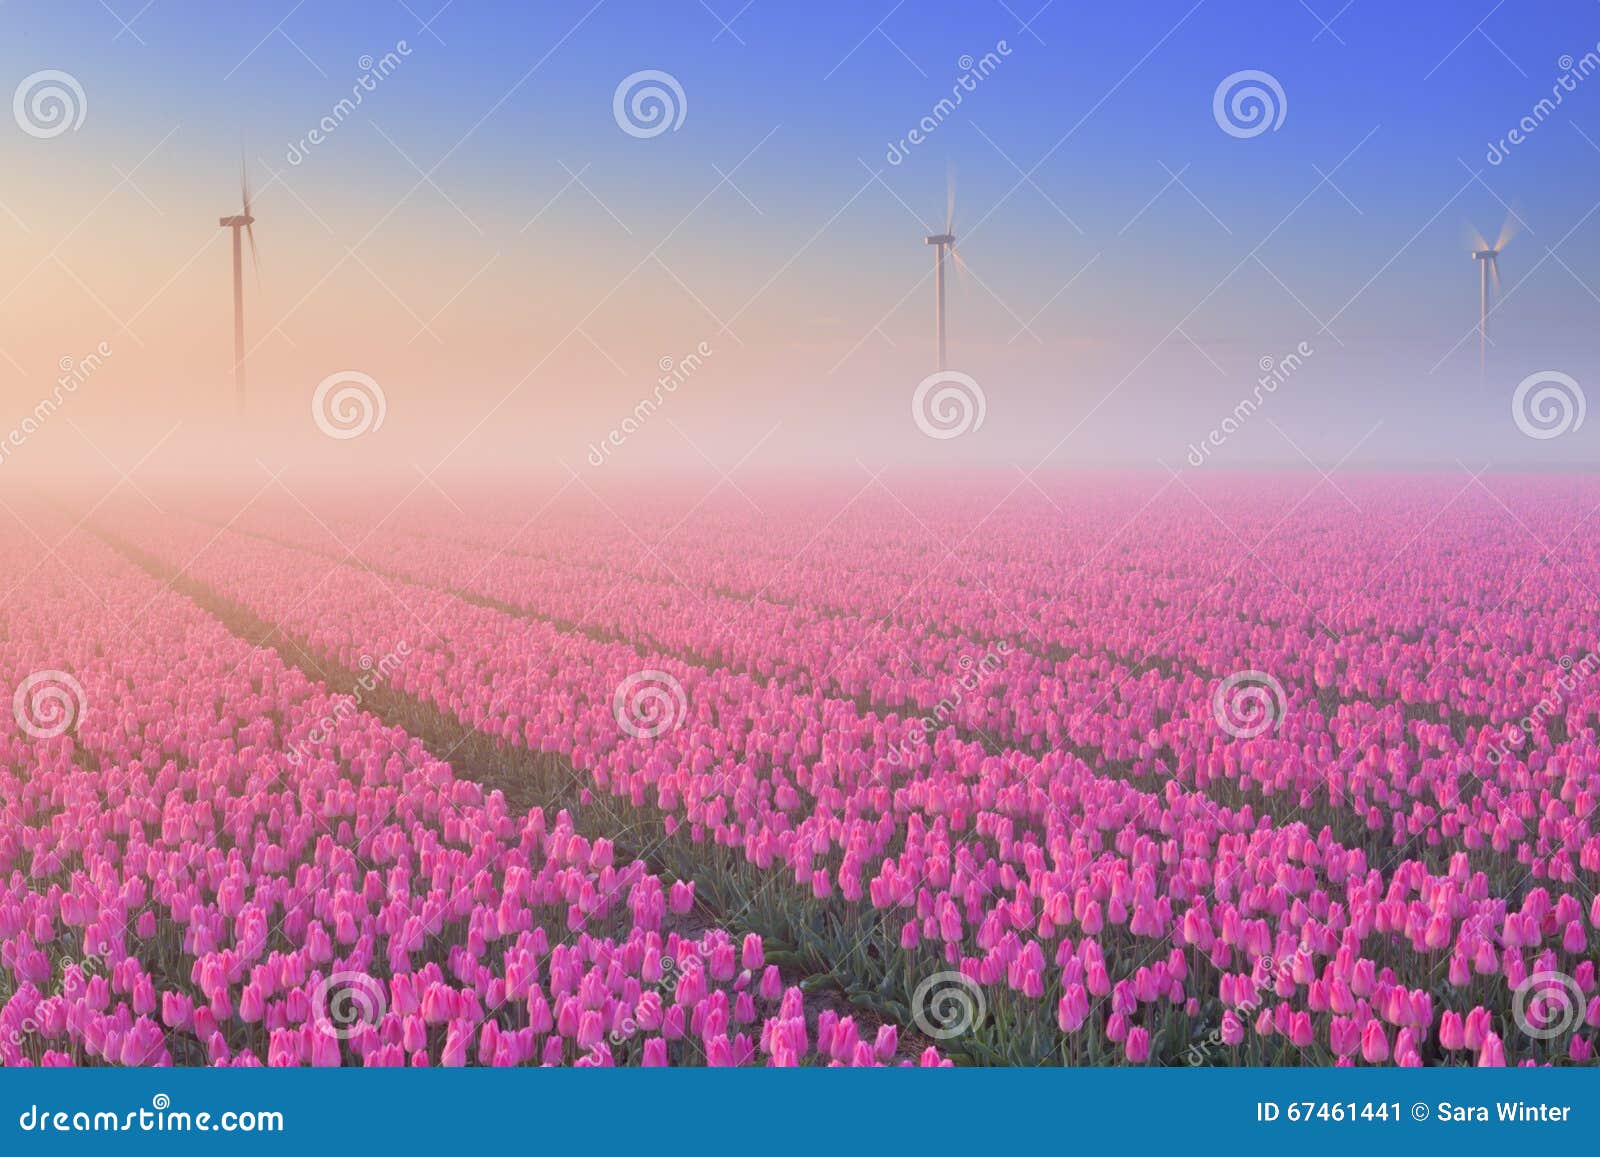 sunrise and fog over blooming tulips, the netherlands